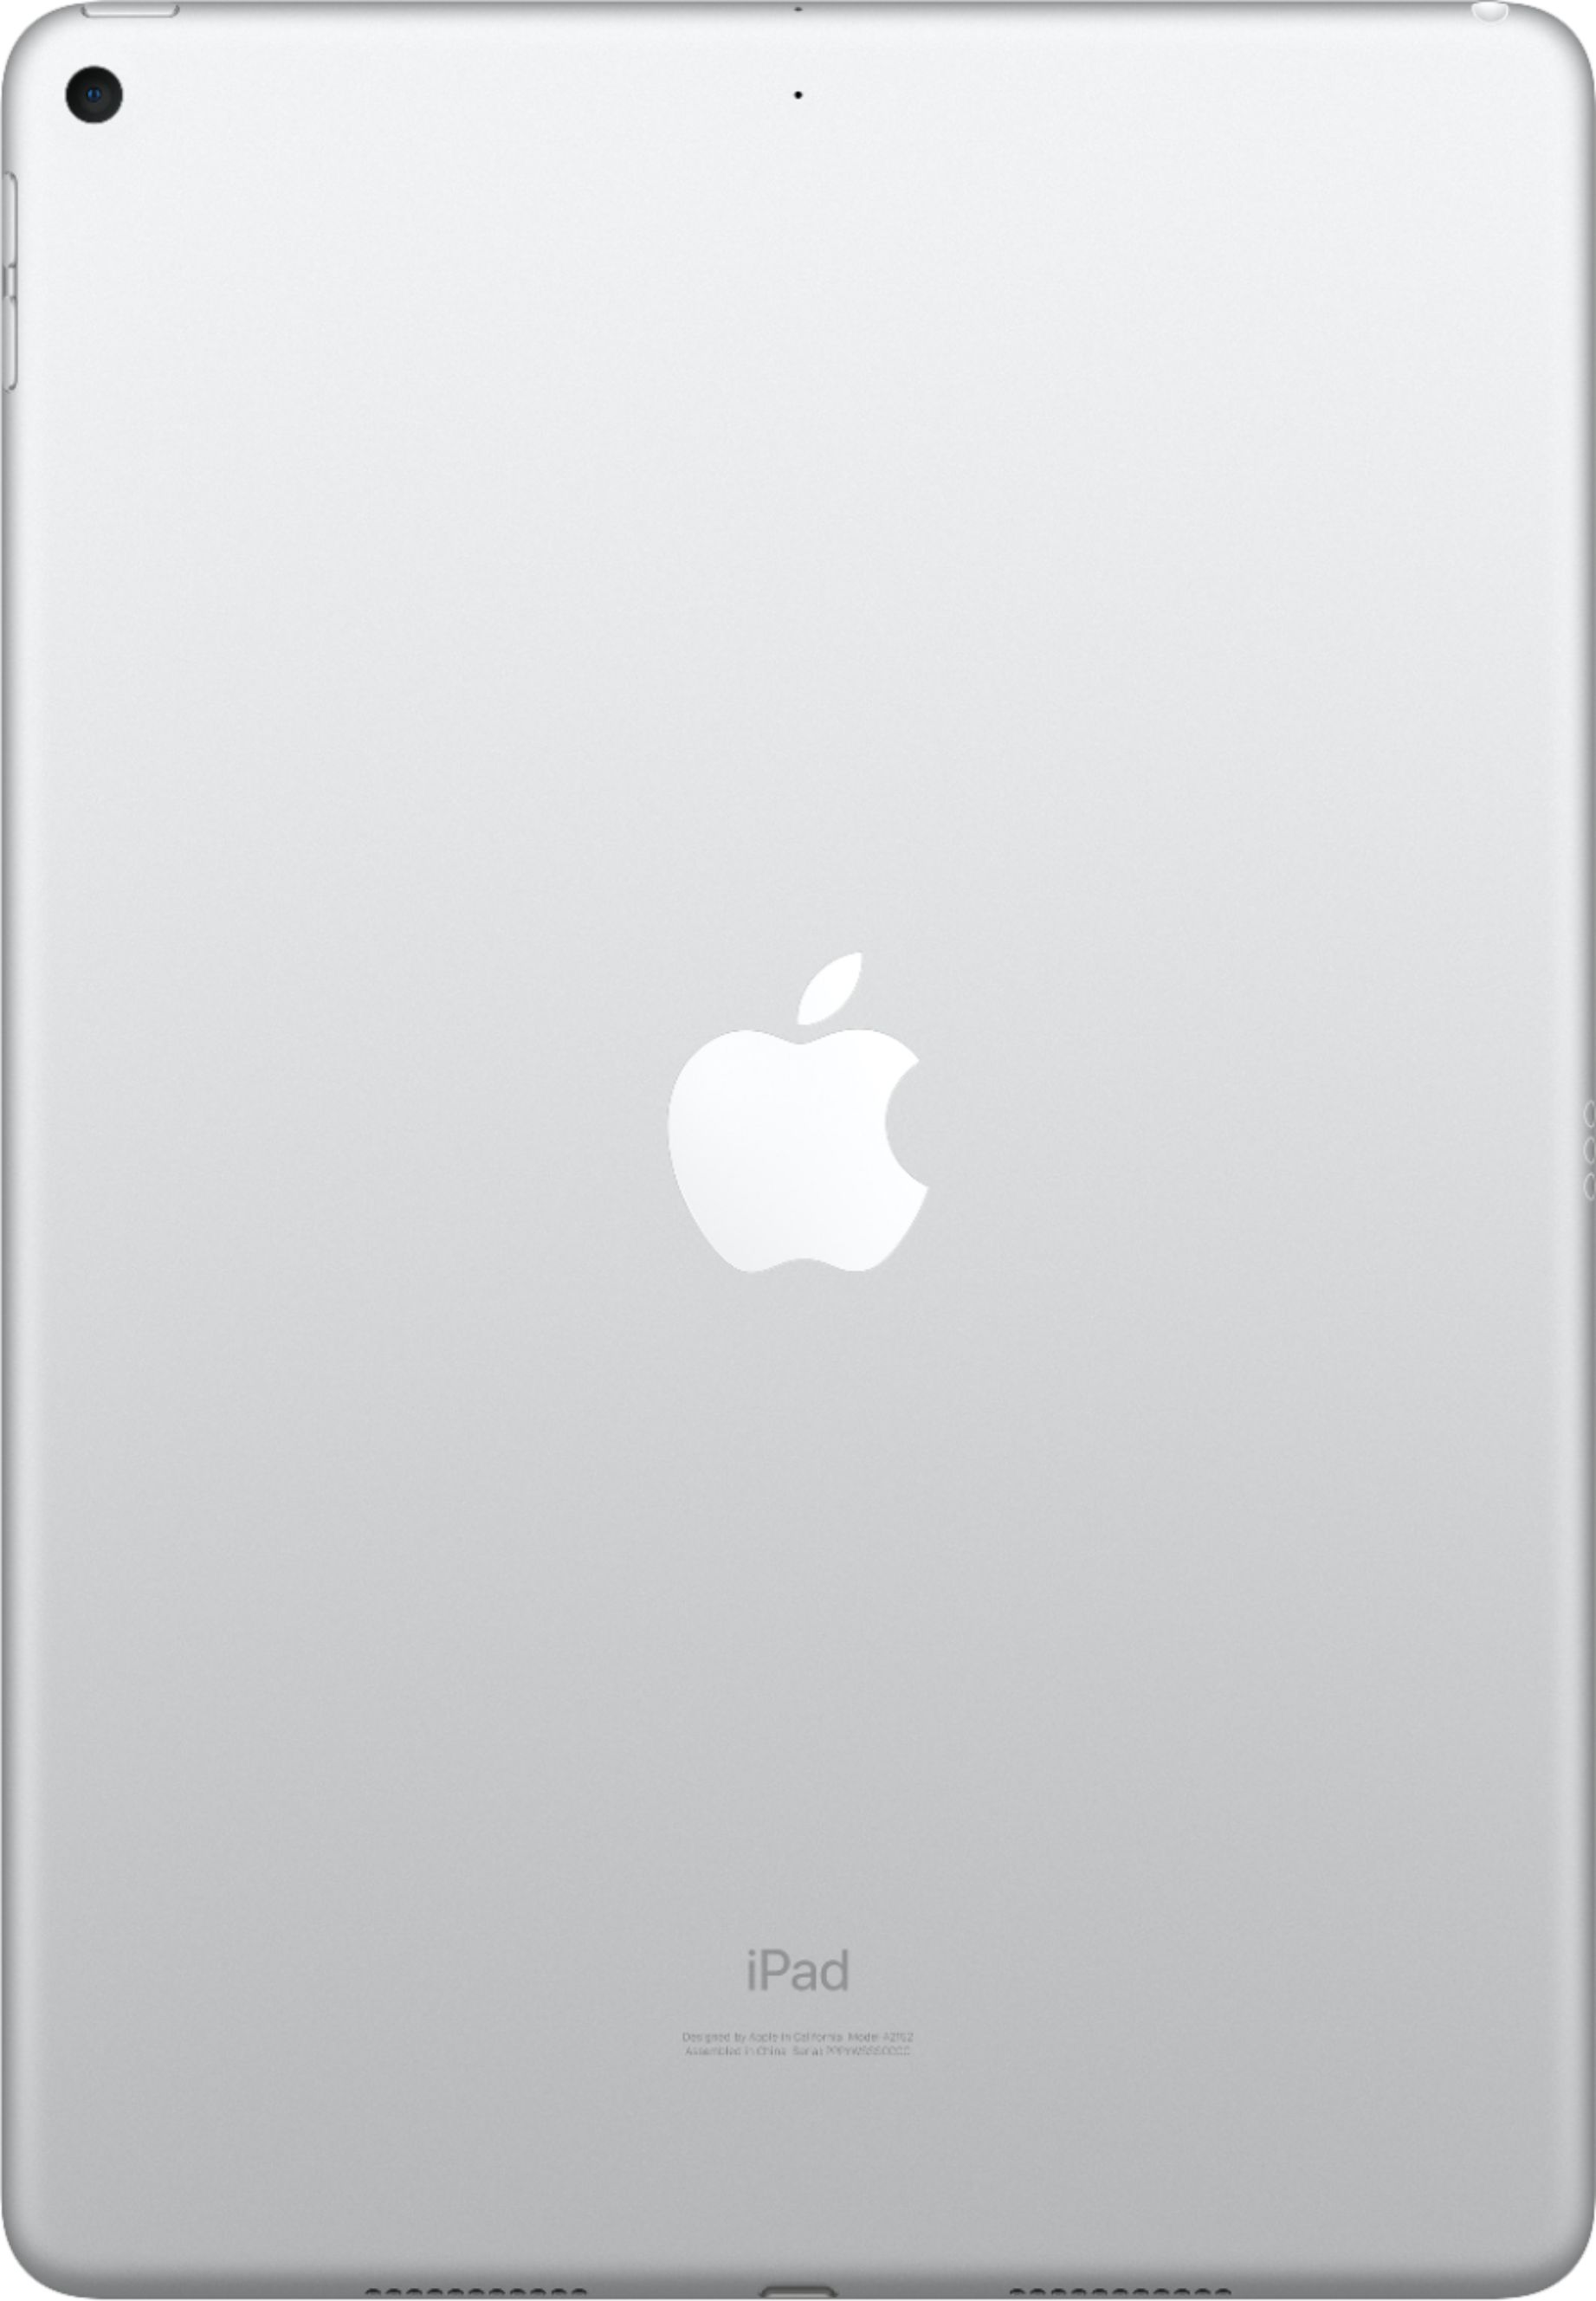 Back View: Apple - Geek Squad Certified Refurbished 12.9-Inch iPad Pro (4th Generation) with Wi-Fi - 128GB - Space Gray